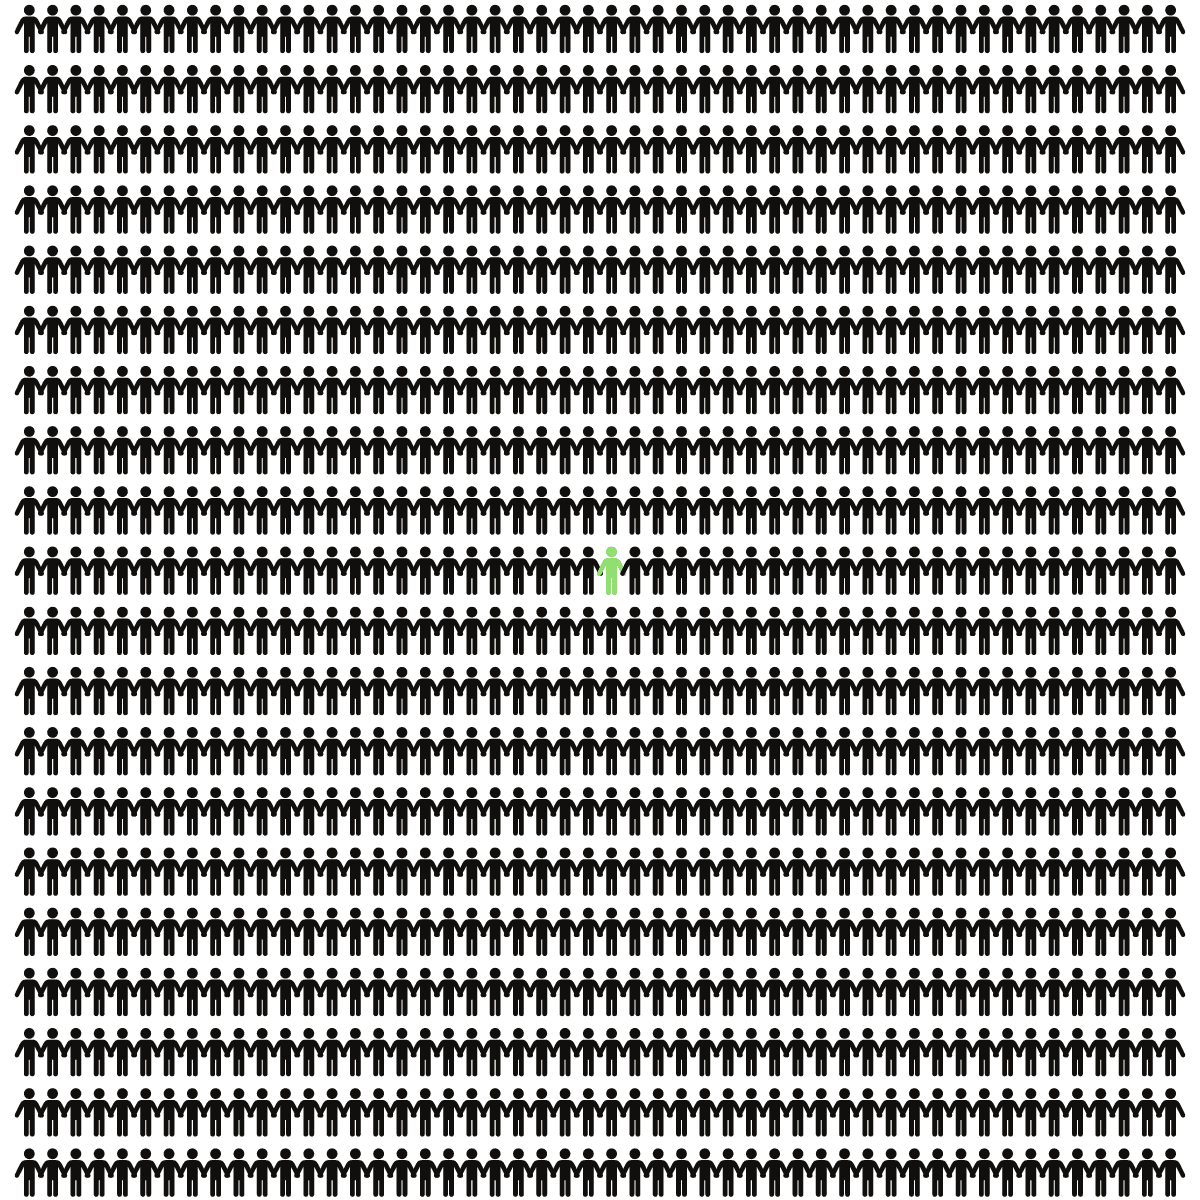 1000 stick figures with one green person